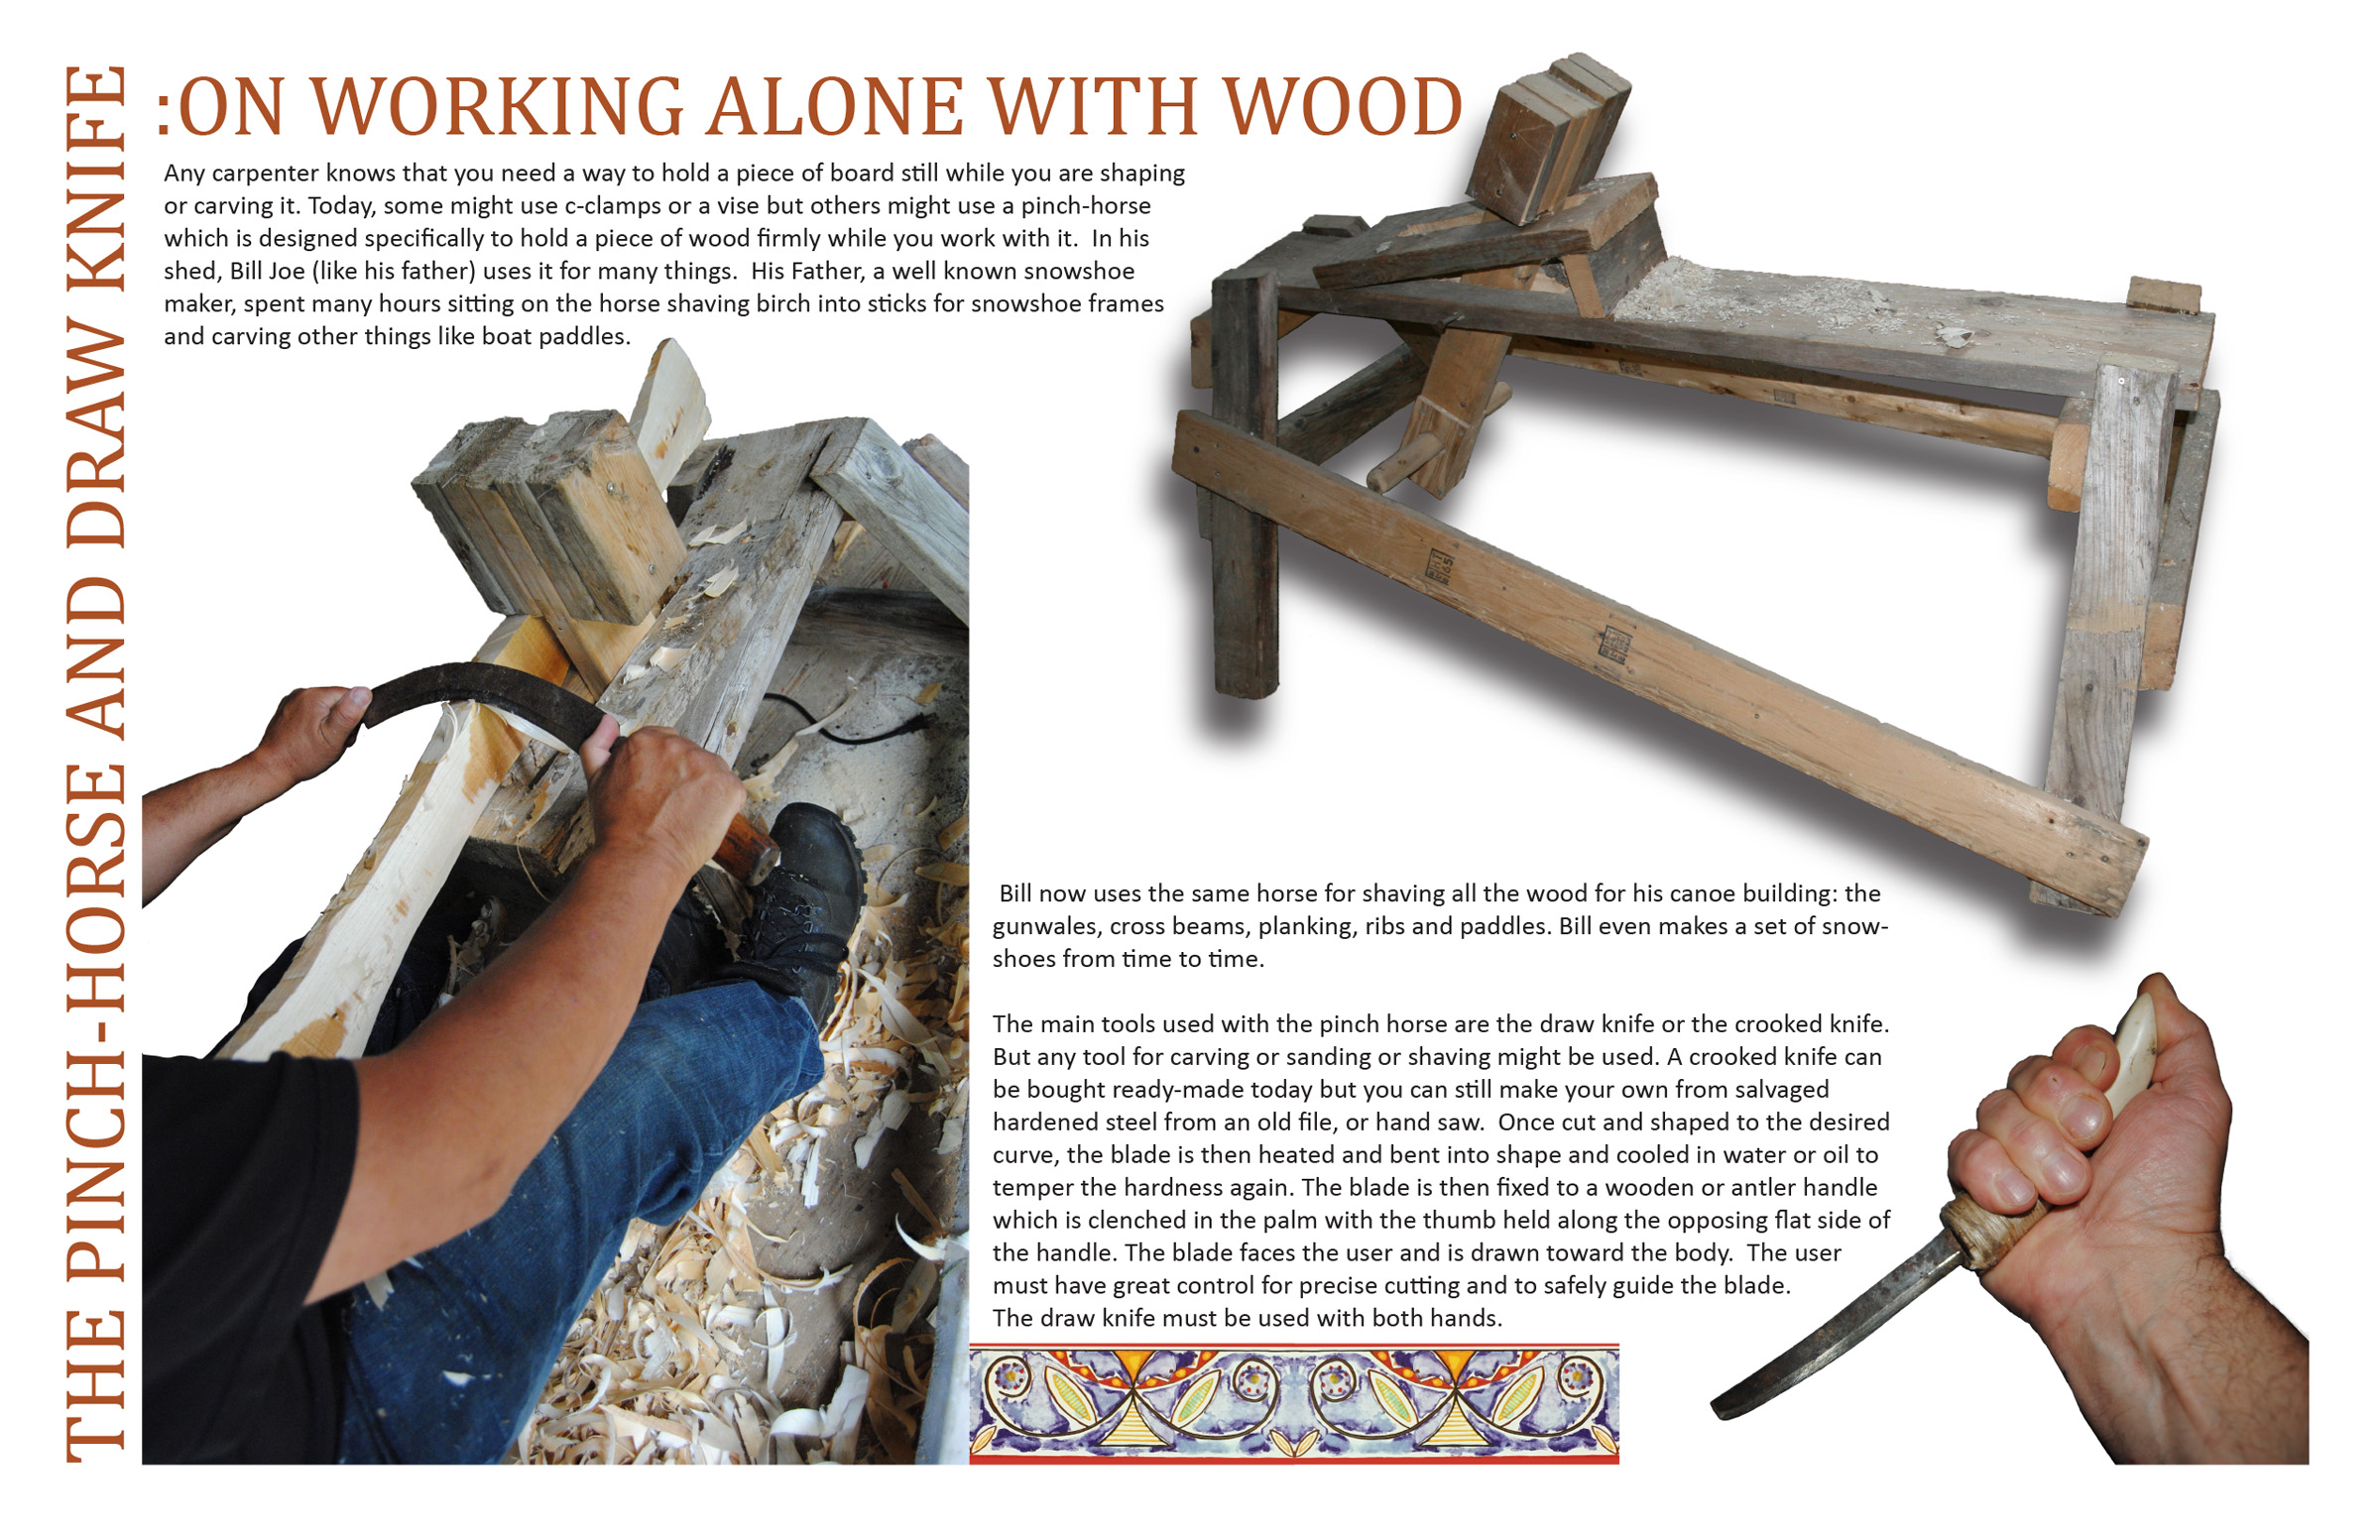 The Pinch-Horse and Draw Knife: On Working Alone with Wood › Towards an  Encyclopedia of Local Knowledge